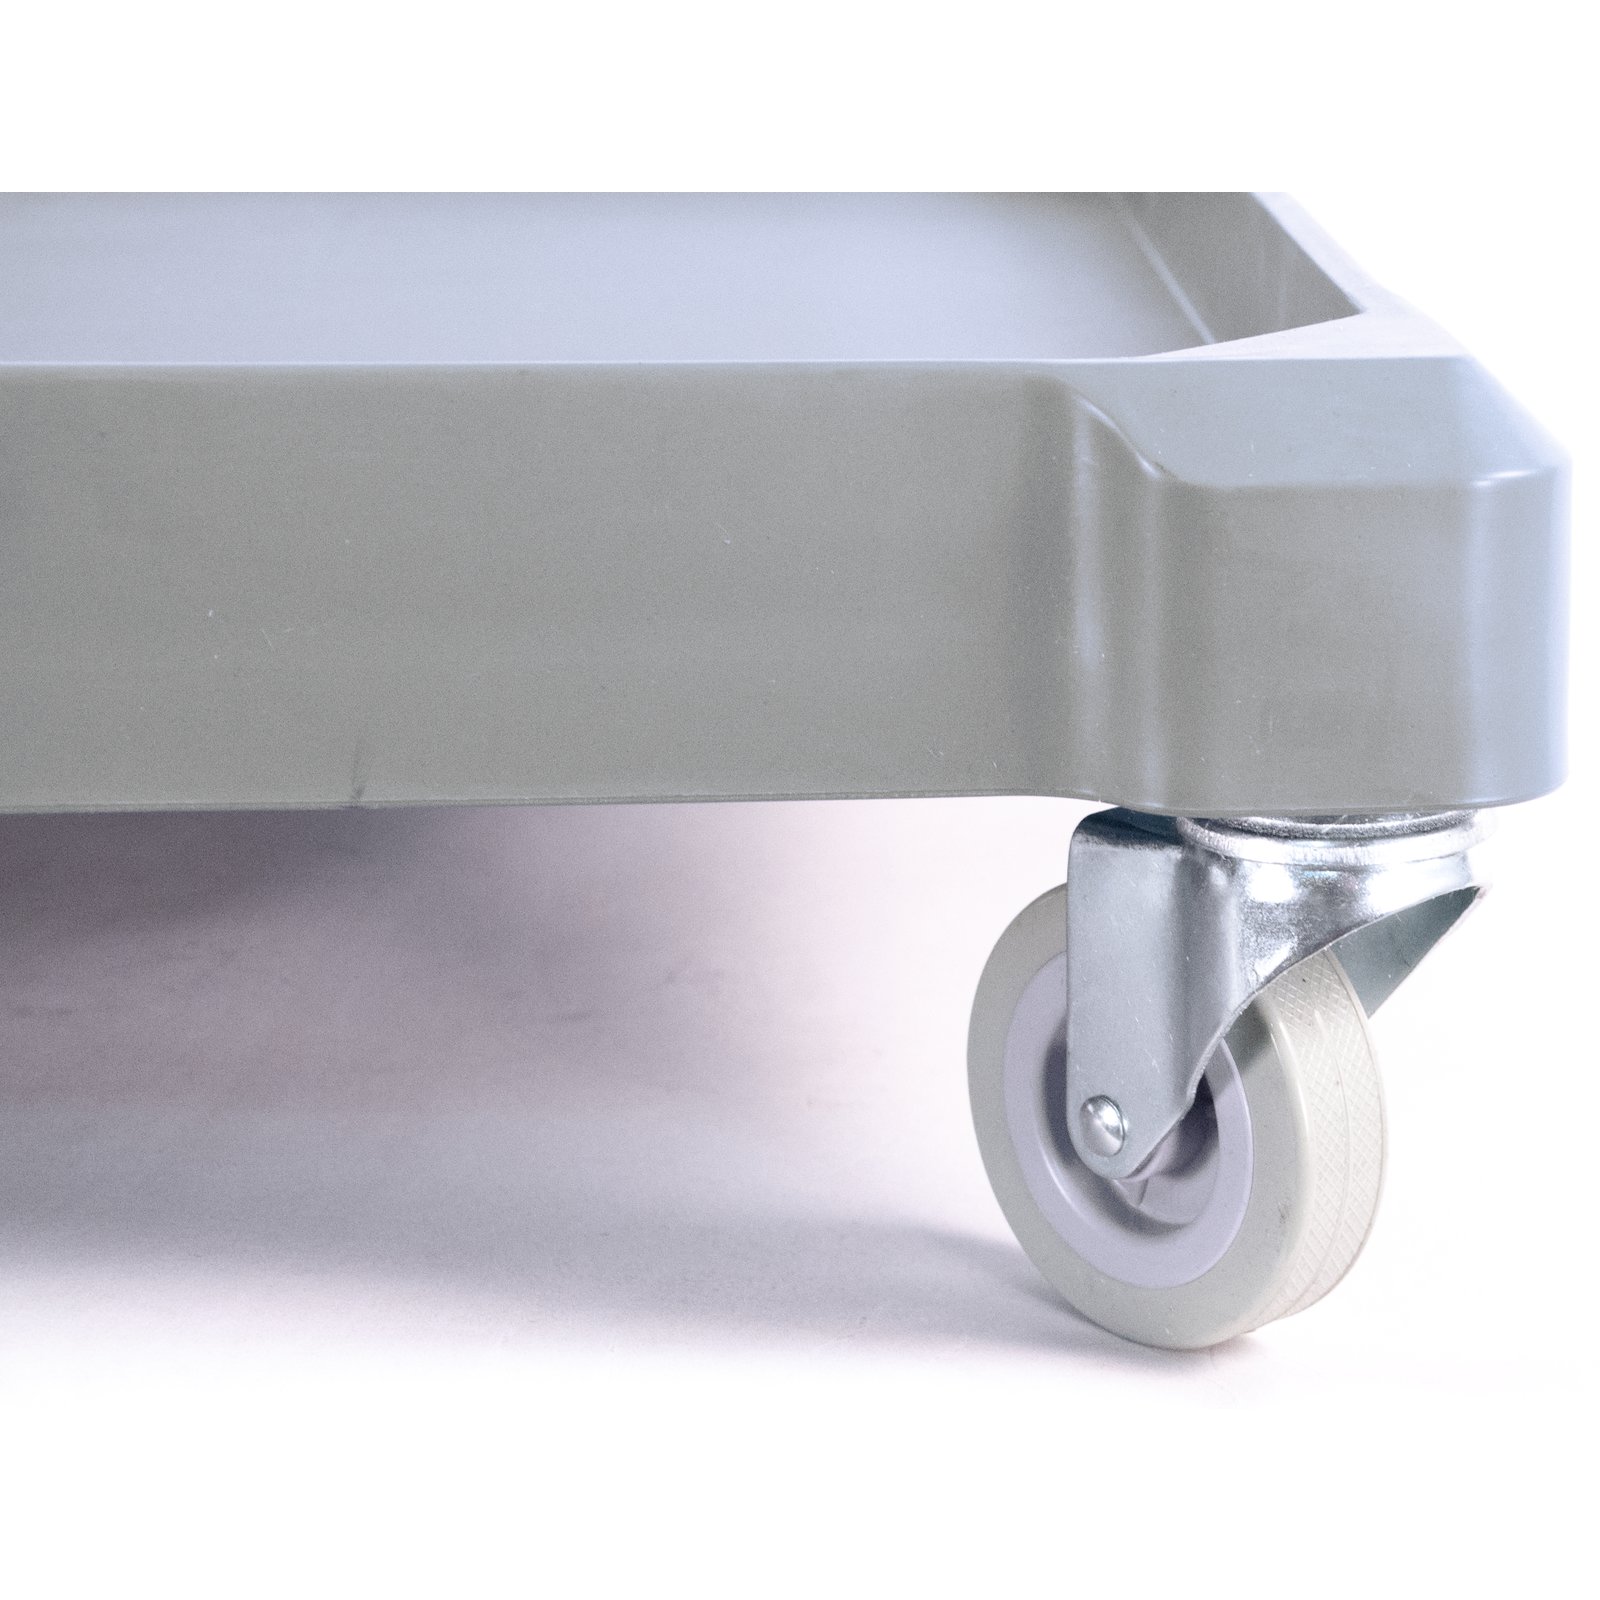 JL Janitor Cart Gray with Cover